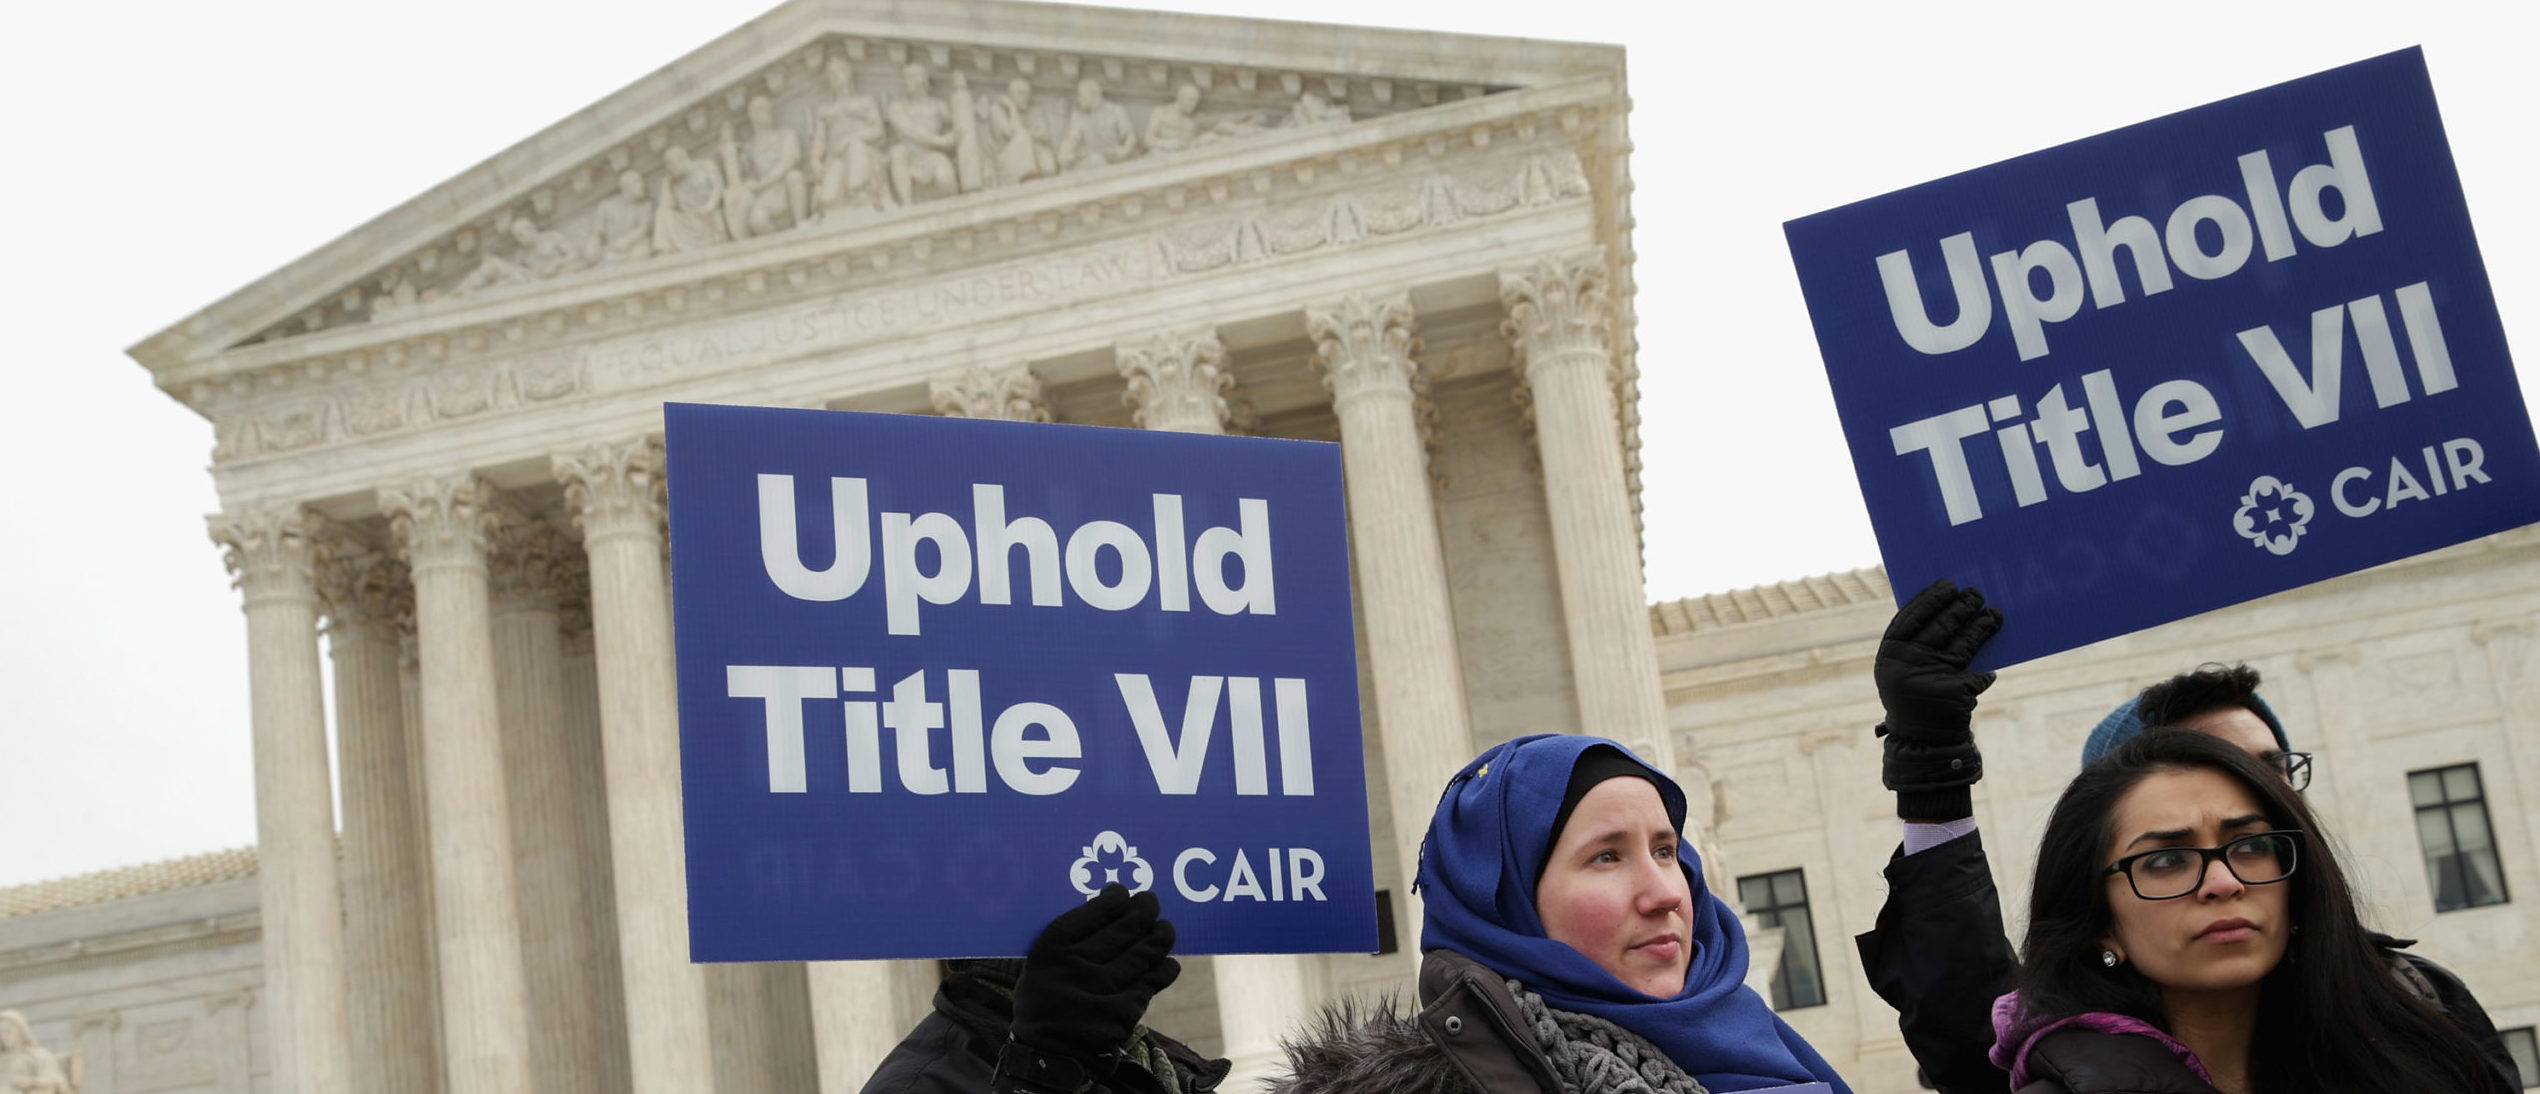 WASHINGTON, DC - FEBRUARY 25: Lauren Schreiber (L) and Umna Khan join other supporters from The Council on American-Islamic Relations during a news conference outside the U.S. Supreme Court after the court heard oral arguments in EEOC v. Abercrombie & Fitch February 25, 2015 in Washington, DC. Samantha Elauf of Tulsa, Oklahoma, filed a charge of religious discrimination with the Equal Employment Opportunity Commission saying Abercrombie & Fitch violated discrimination laws in 2008 by declining to hire her because she wore a head scarf, a symbol of her Muslim faith. (Photo by Chip Somodevilla/Getty Images)